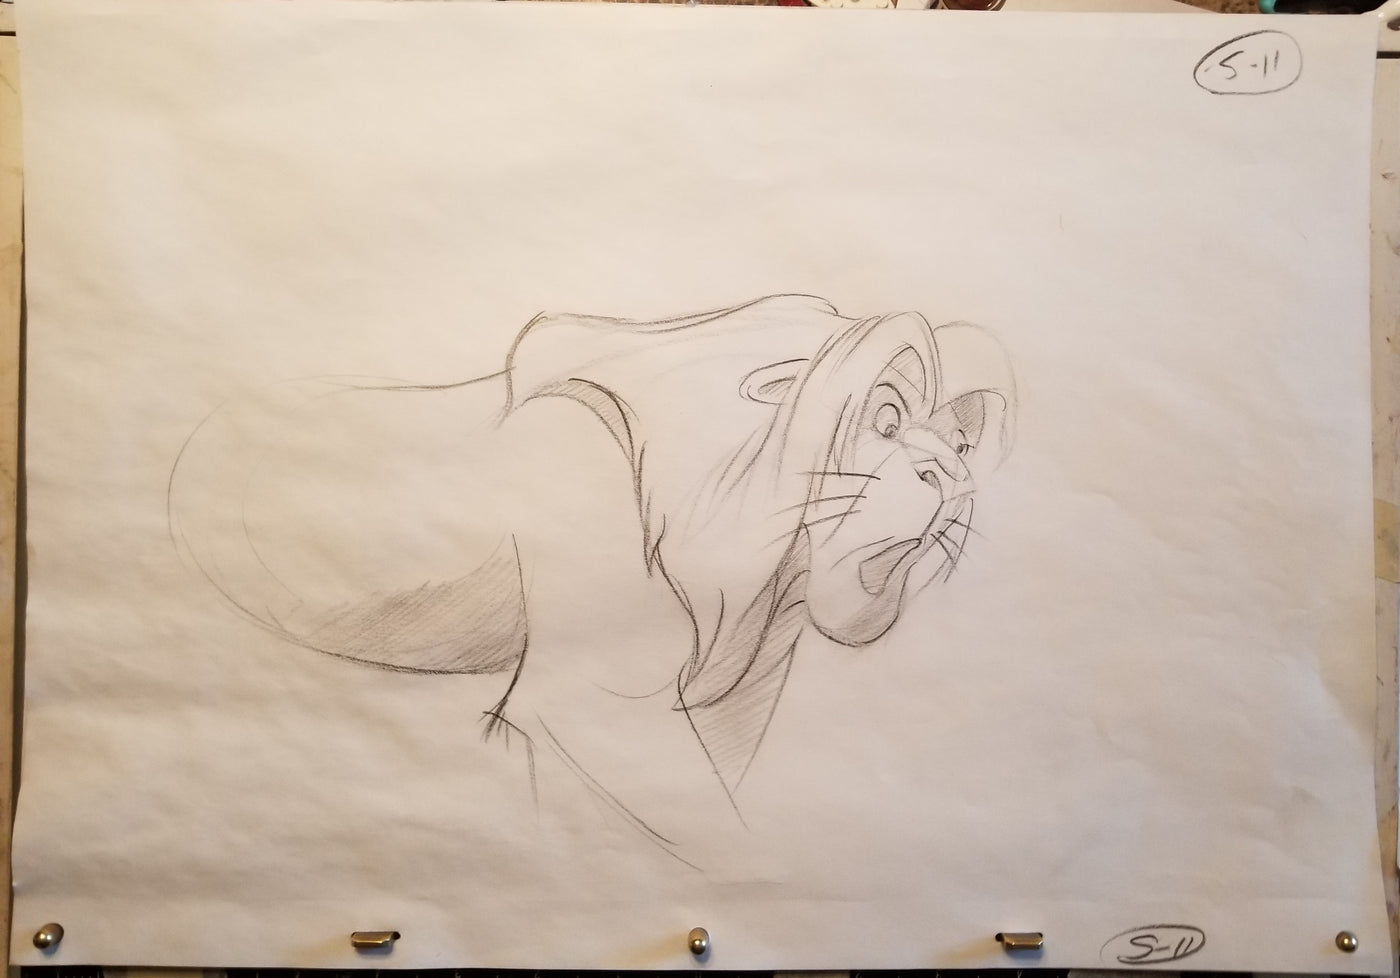 Original Walt Disney Production Drawing from The Lion King featuring Simba